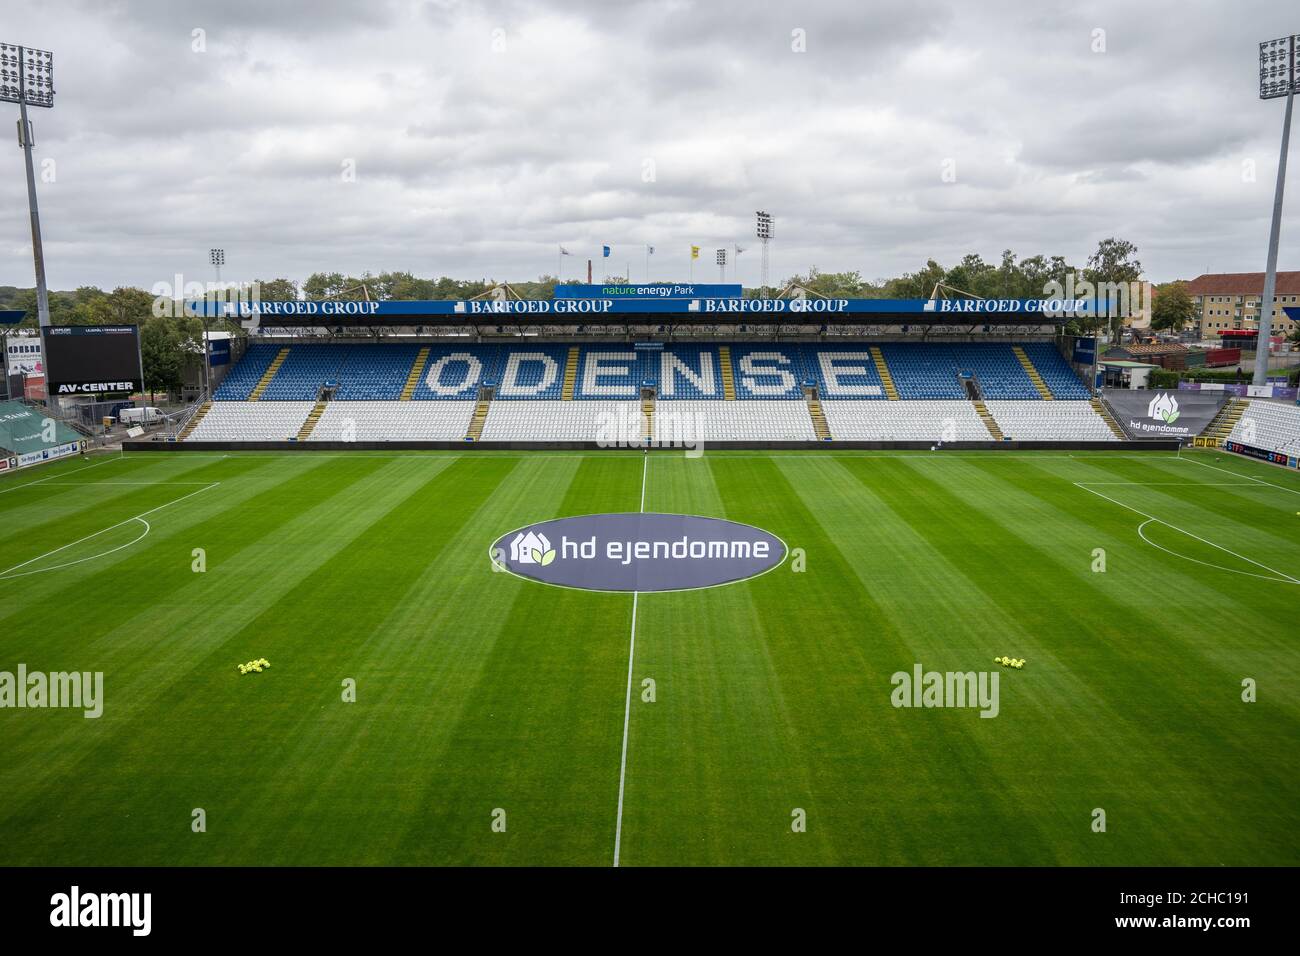 Odense, Denmark. 13th Sep, 2020. The stadium Nature Energy Park is ready  for the 3F Superliga